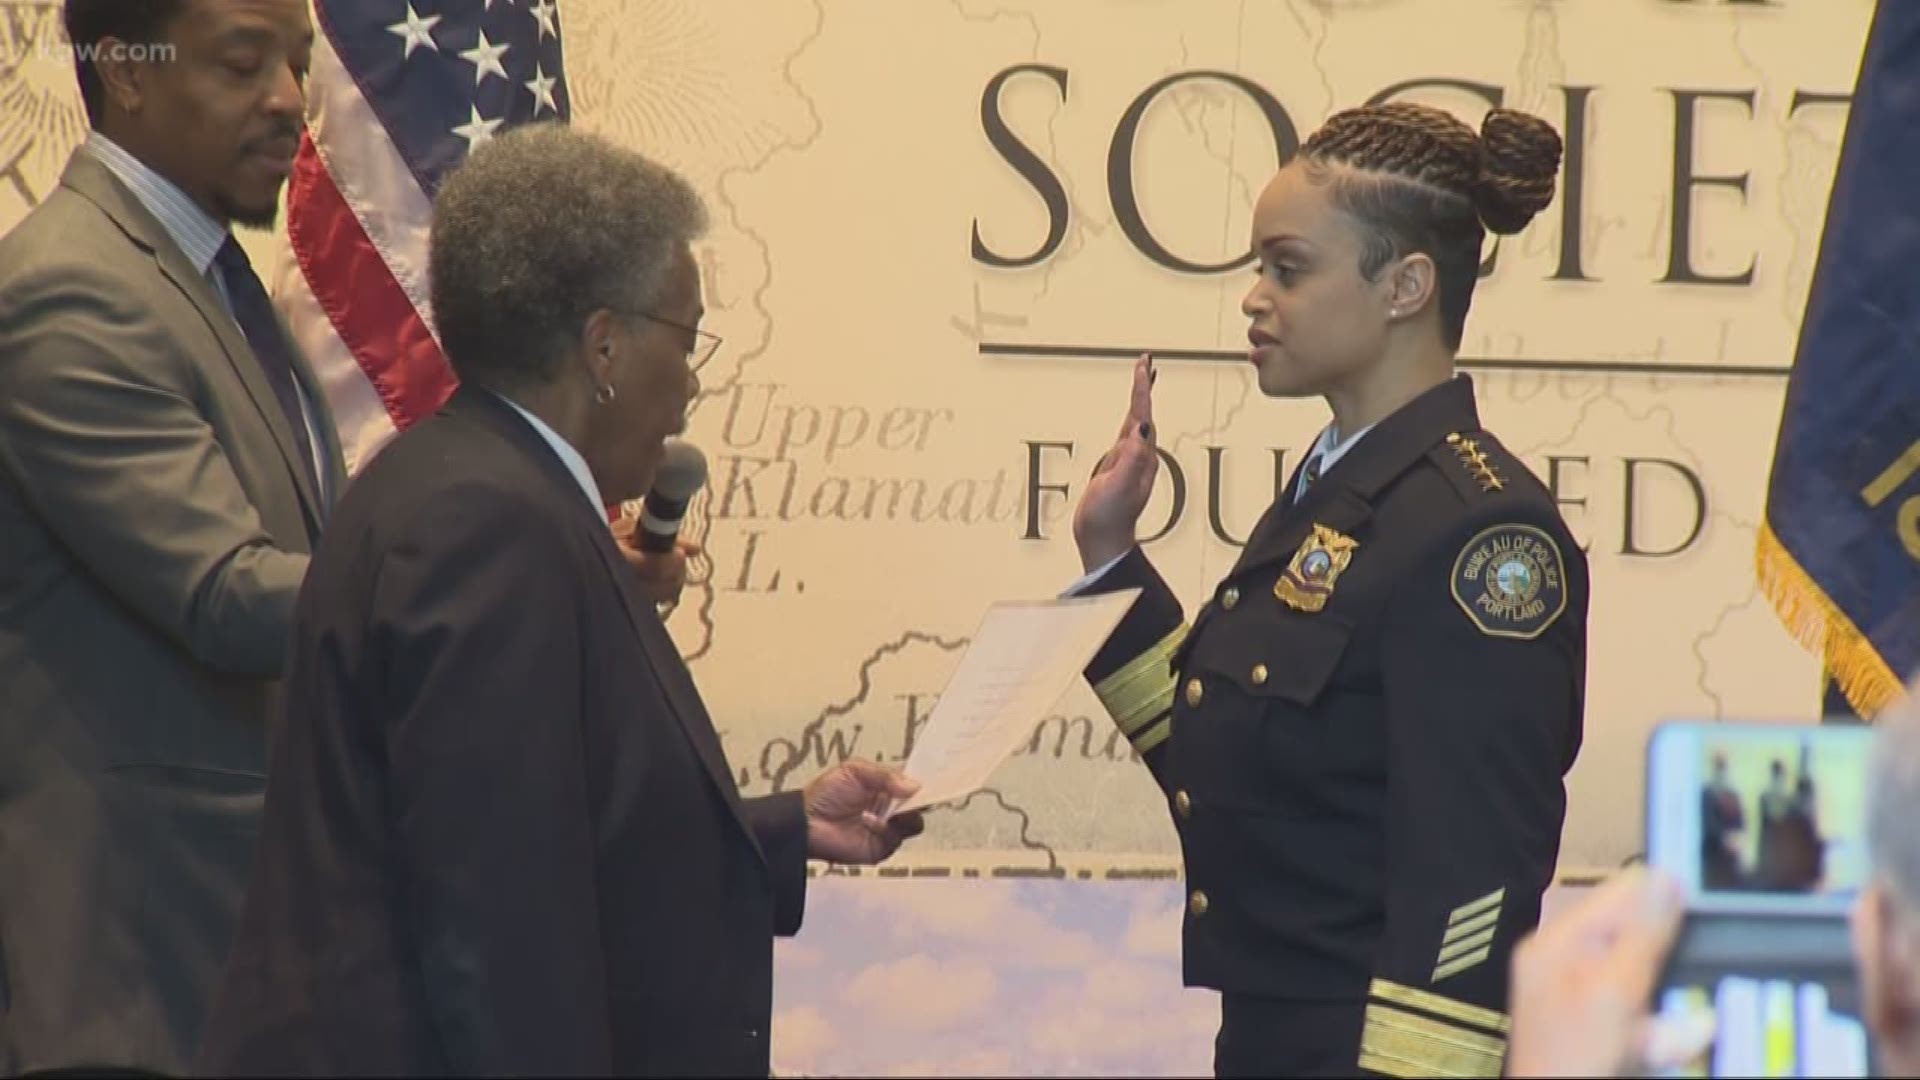 Portland's new police chief, Danielle Outlaw, was sworn in on Monday, Jan. 22